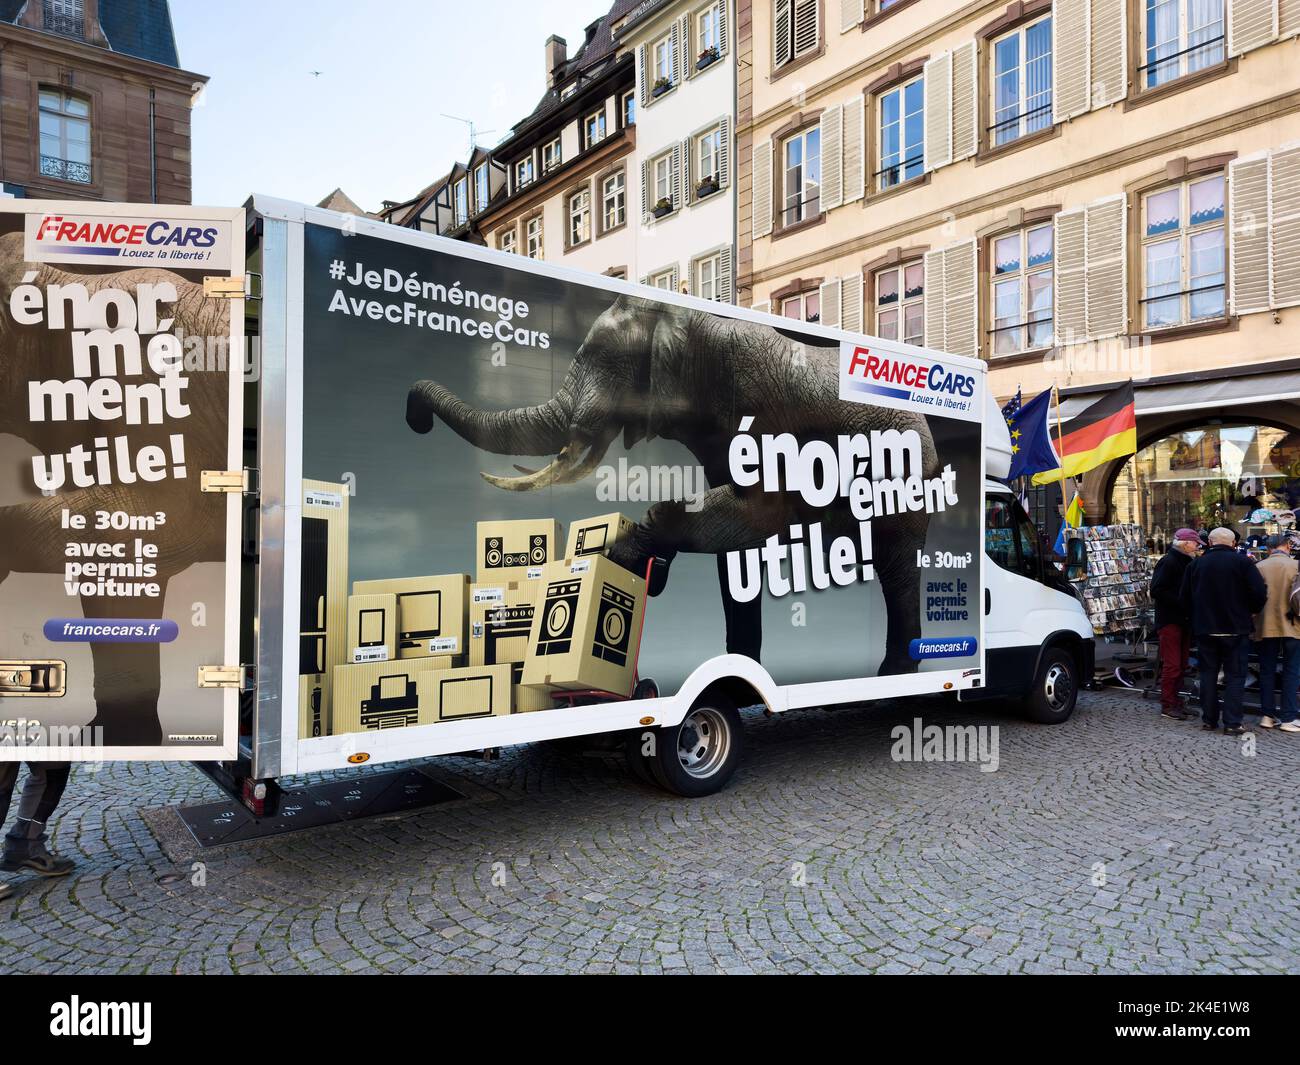 Strasbourg, France Sep 21, 2022: France cars moving relocation services van parked in city cenbter - elephant photograph on the car body Stock Photo